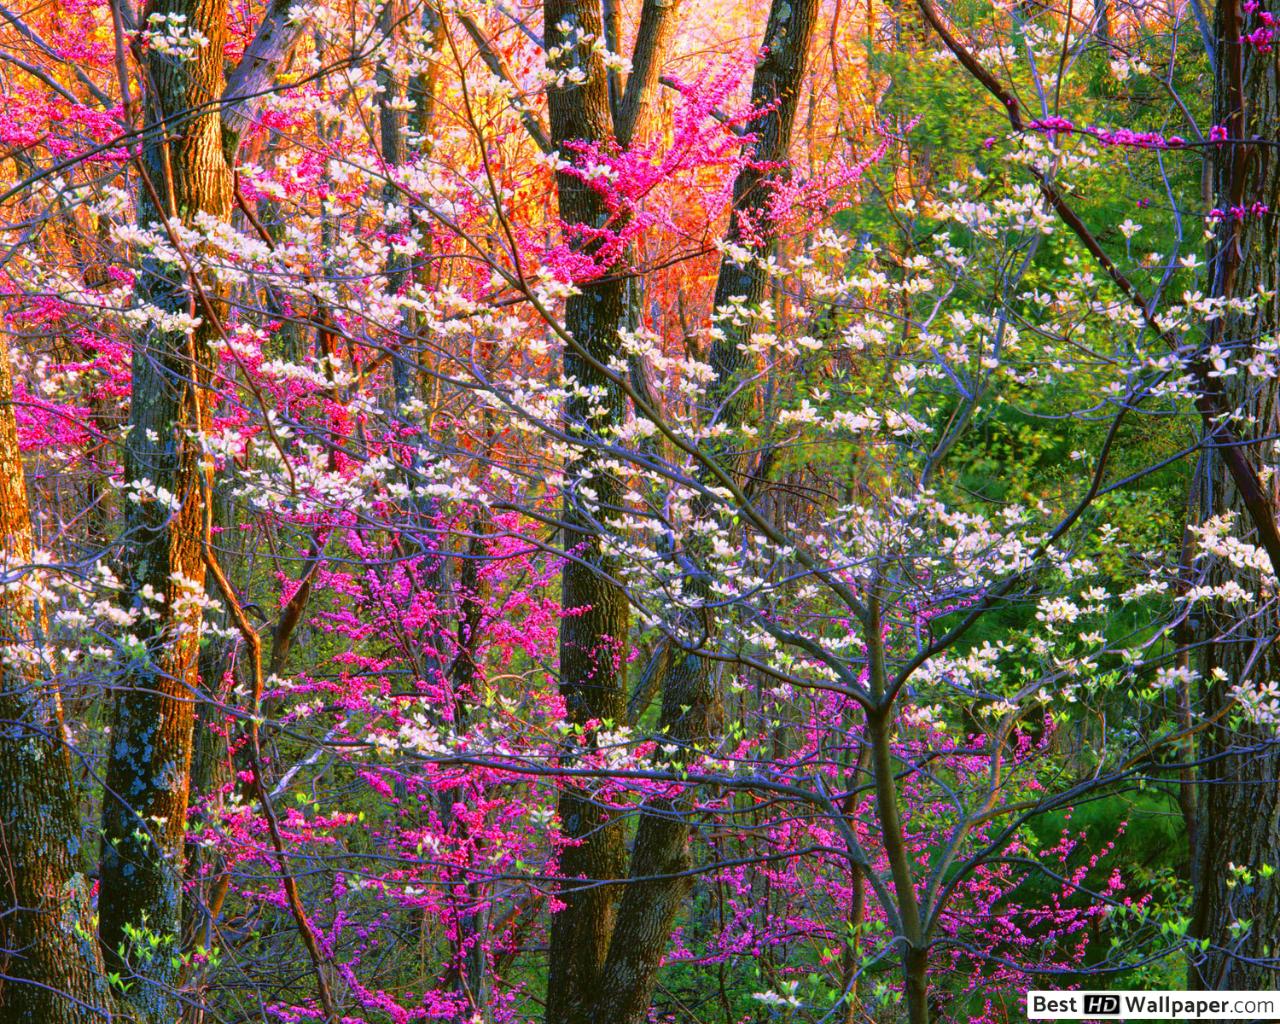 Flower Forests In The Spring Wallpapers - Wallpaper Cave